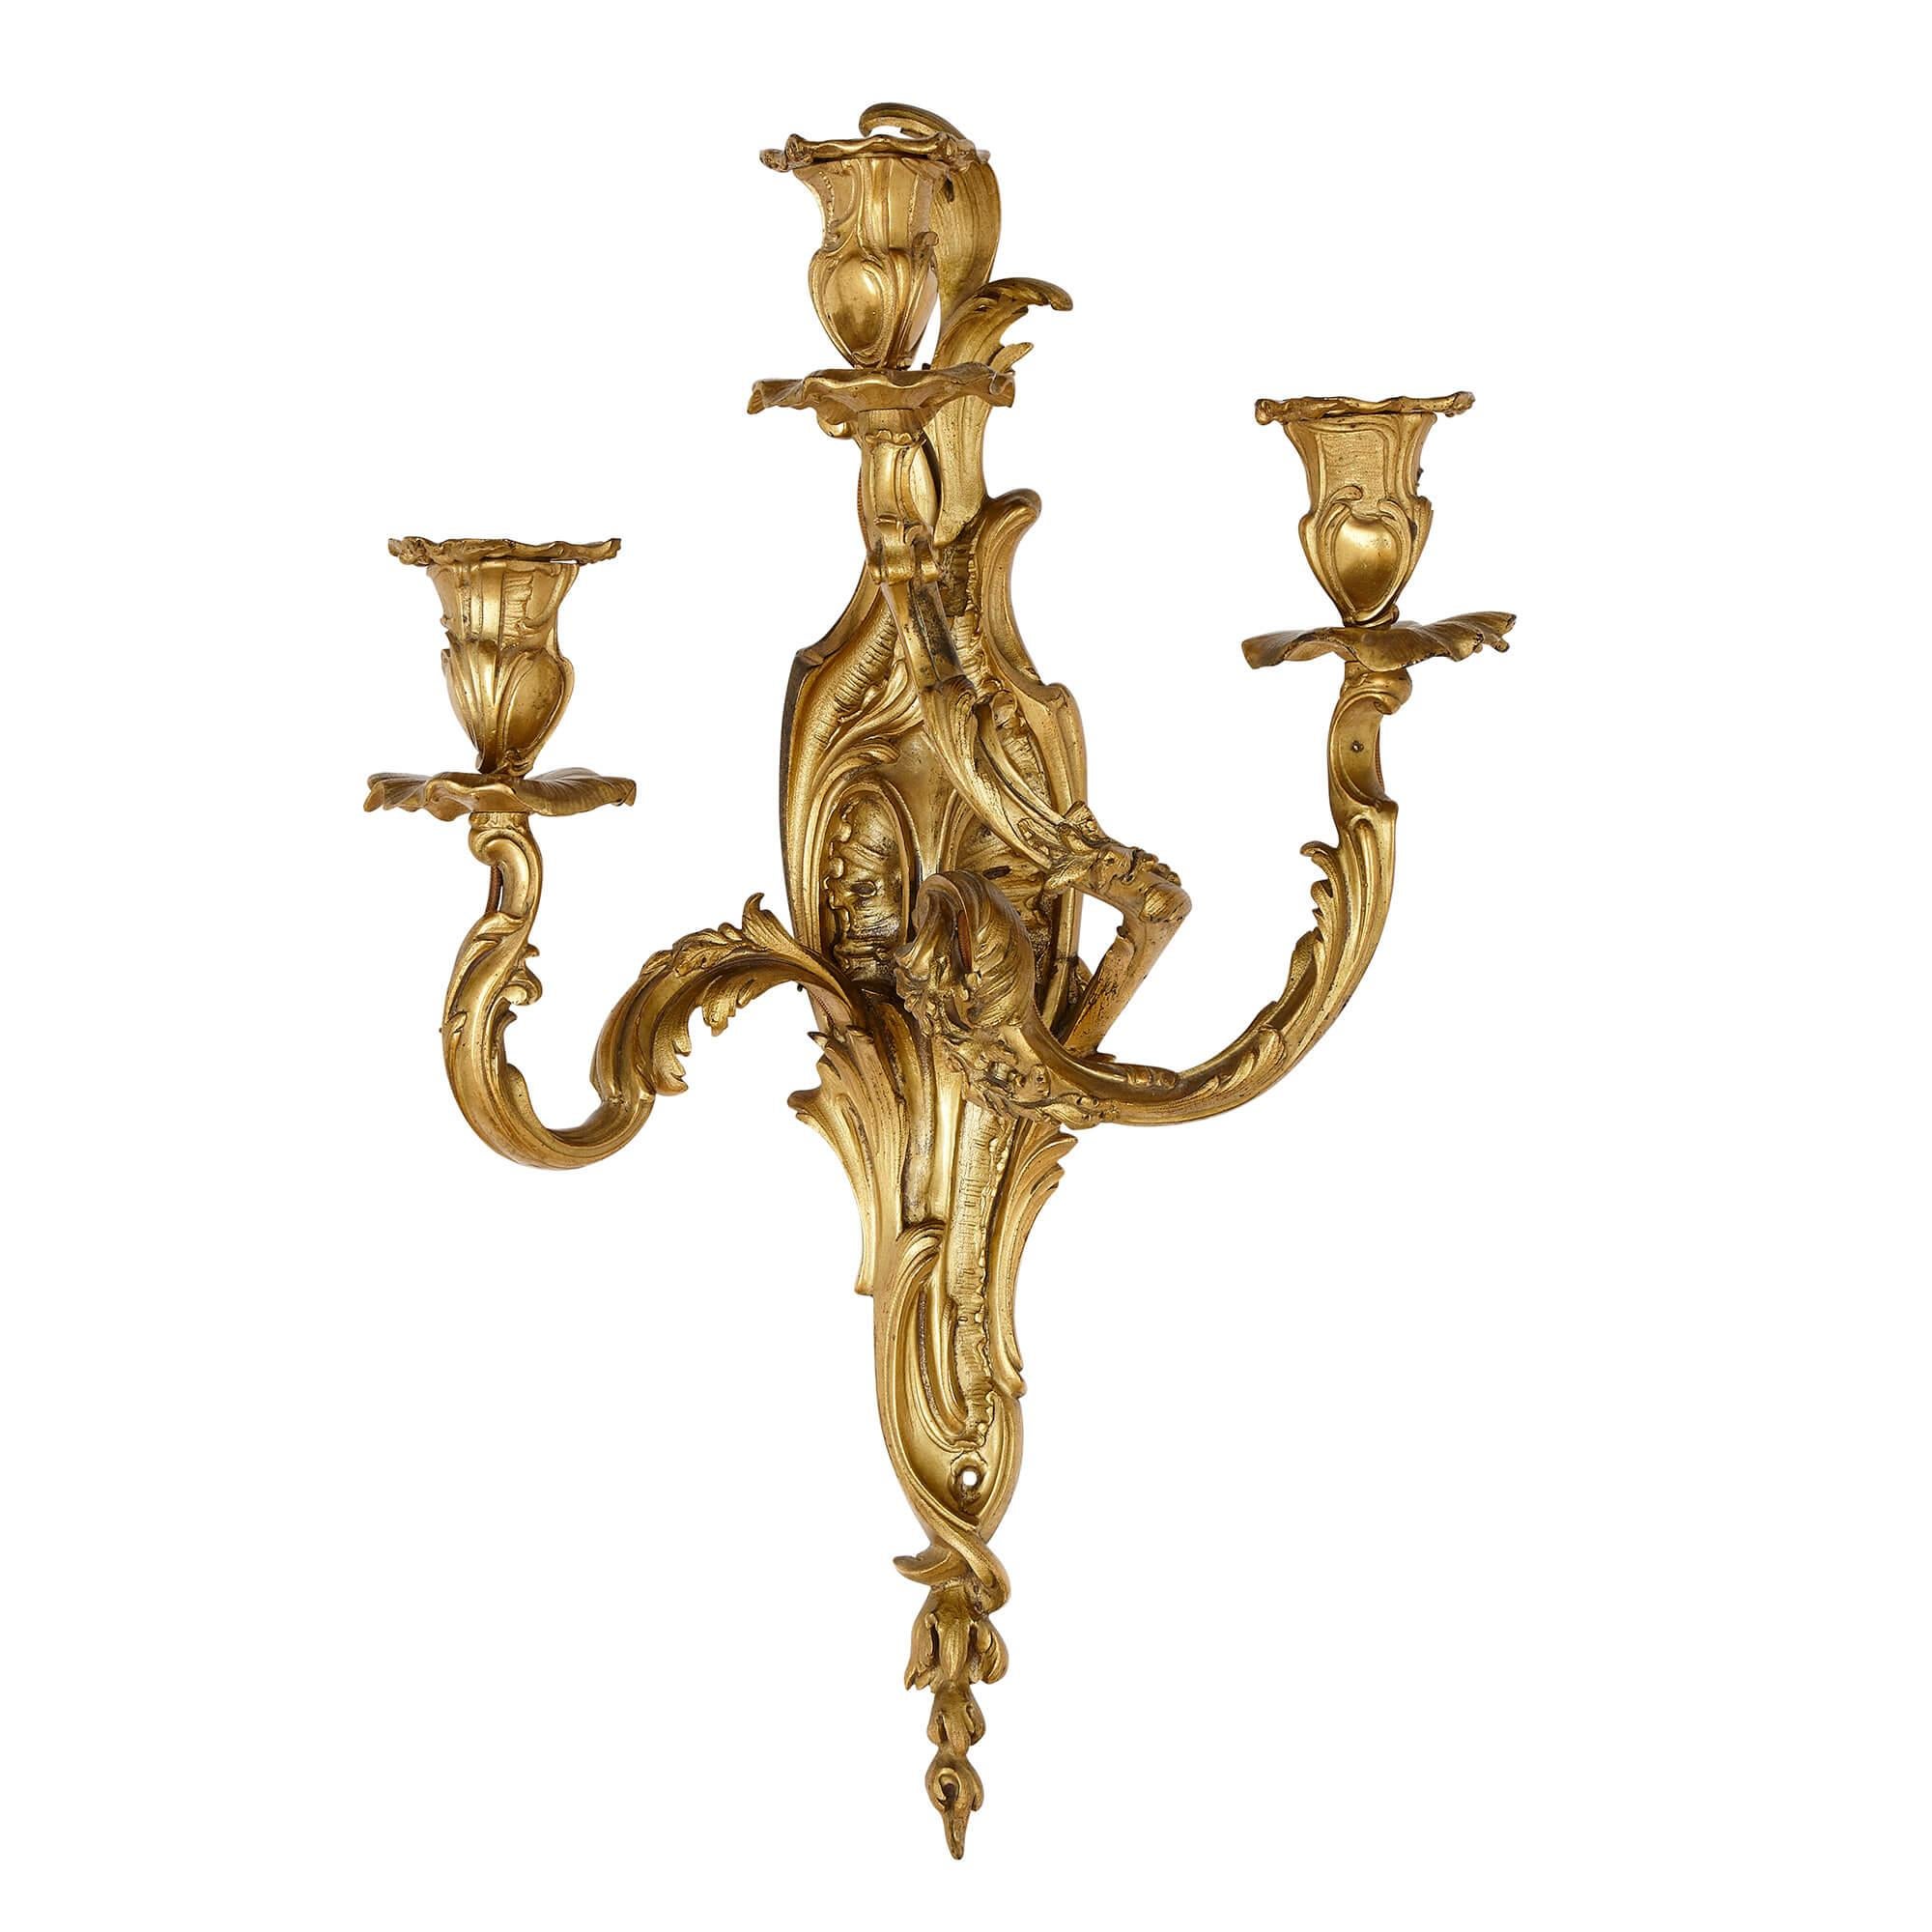 Pair of Rococo style gilt bronze sconces
French, 19th Century
Measures: Height 50cm, width 31cm, depth 16cm

This elegant pair of sconces beautifully demonstrates the Rococo, or Louis XV, style. Each gilt bronze sconce features an elongated